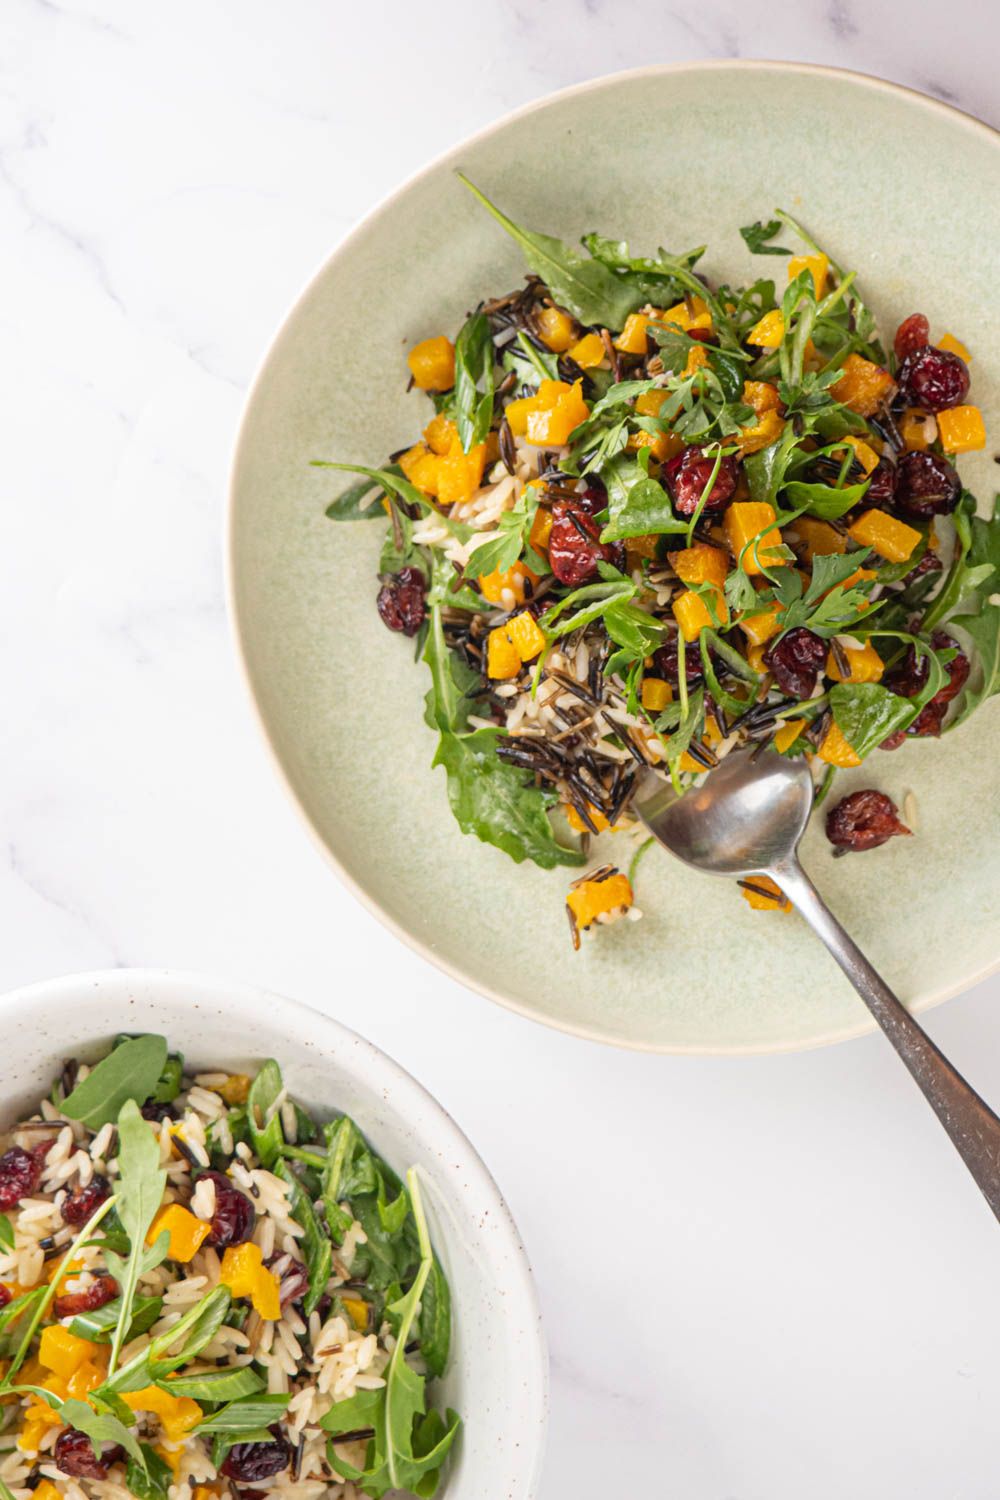 Wild rice salad in a bowl with arugula, squash, cranberries, and a lemon tahini dressing.